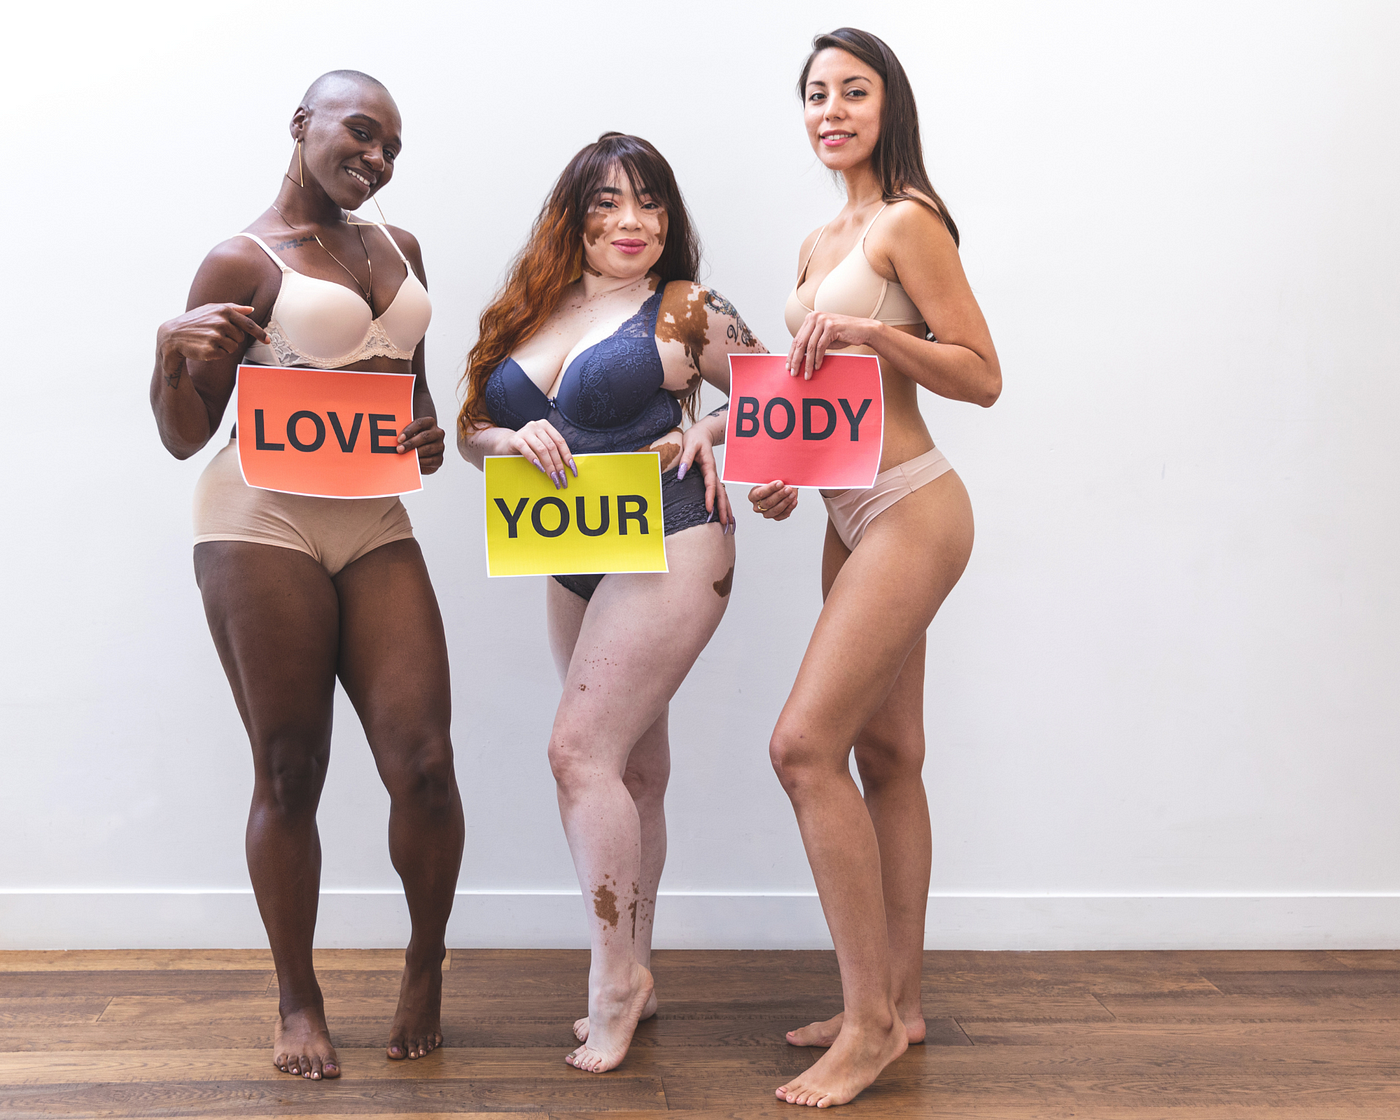 4 Ways To Improve Your Body Image Immediately - Girls Gone Strong